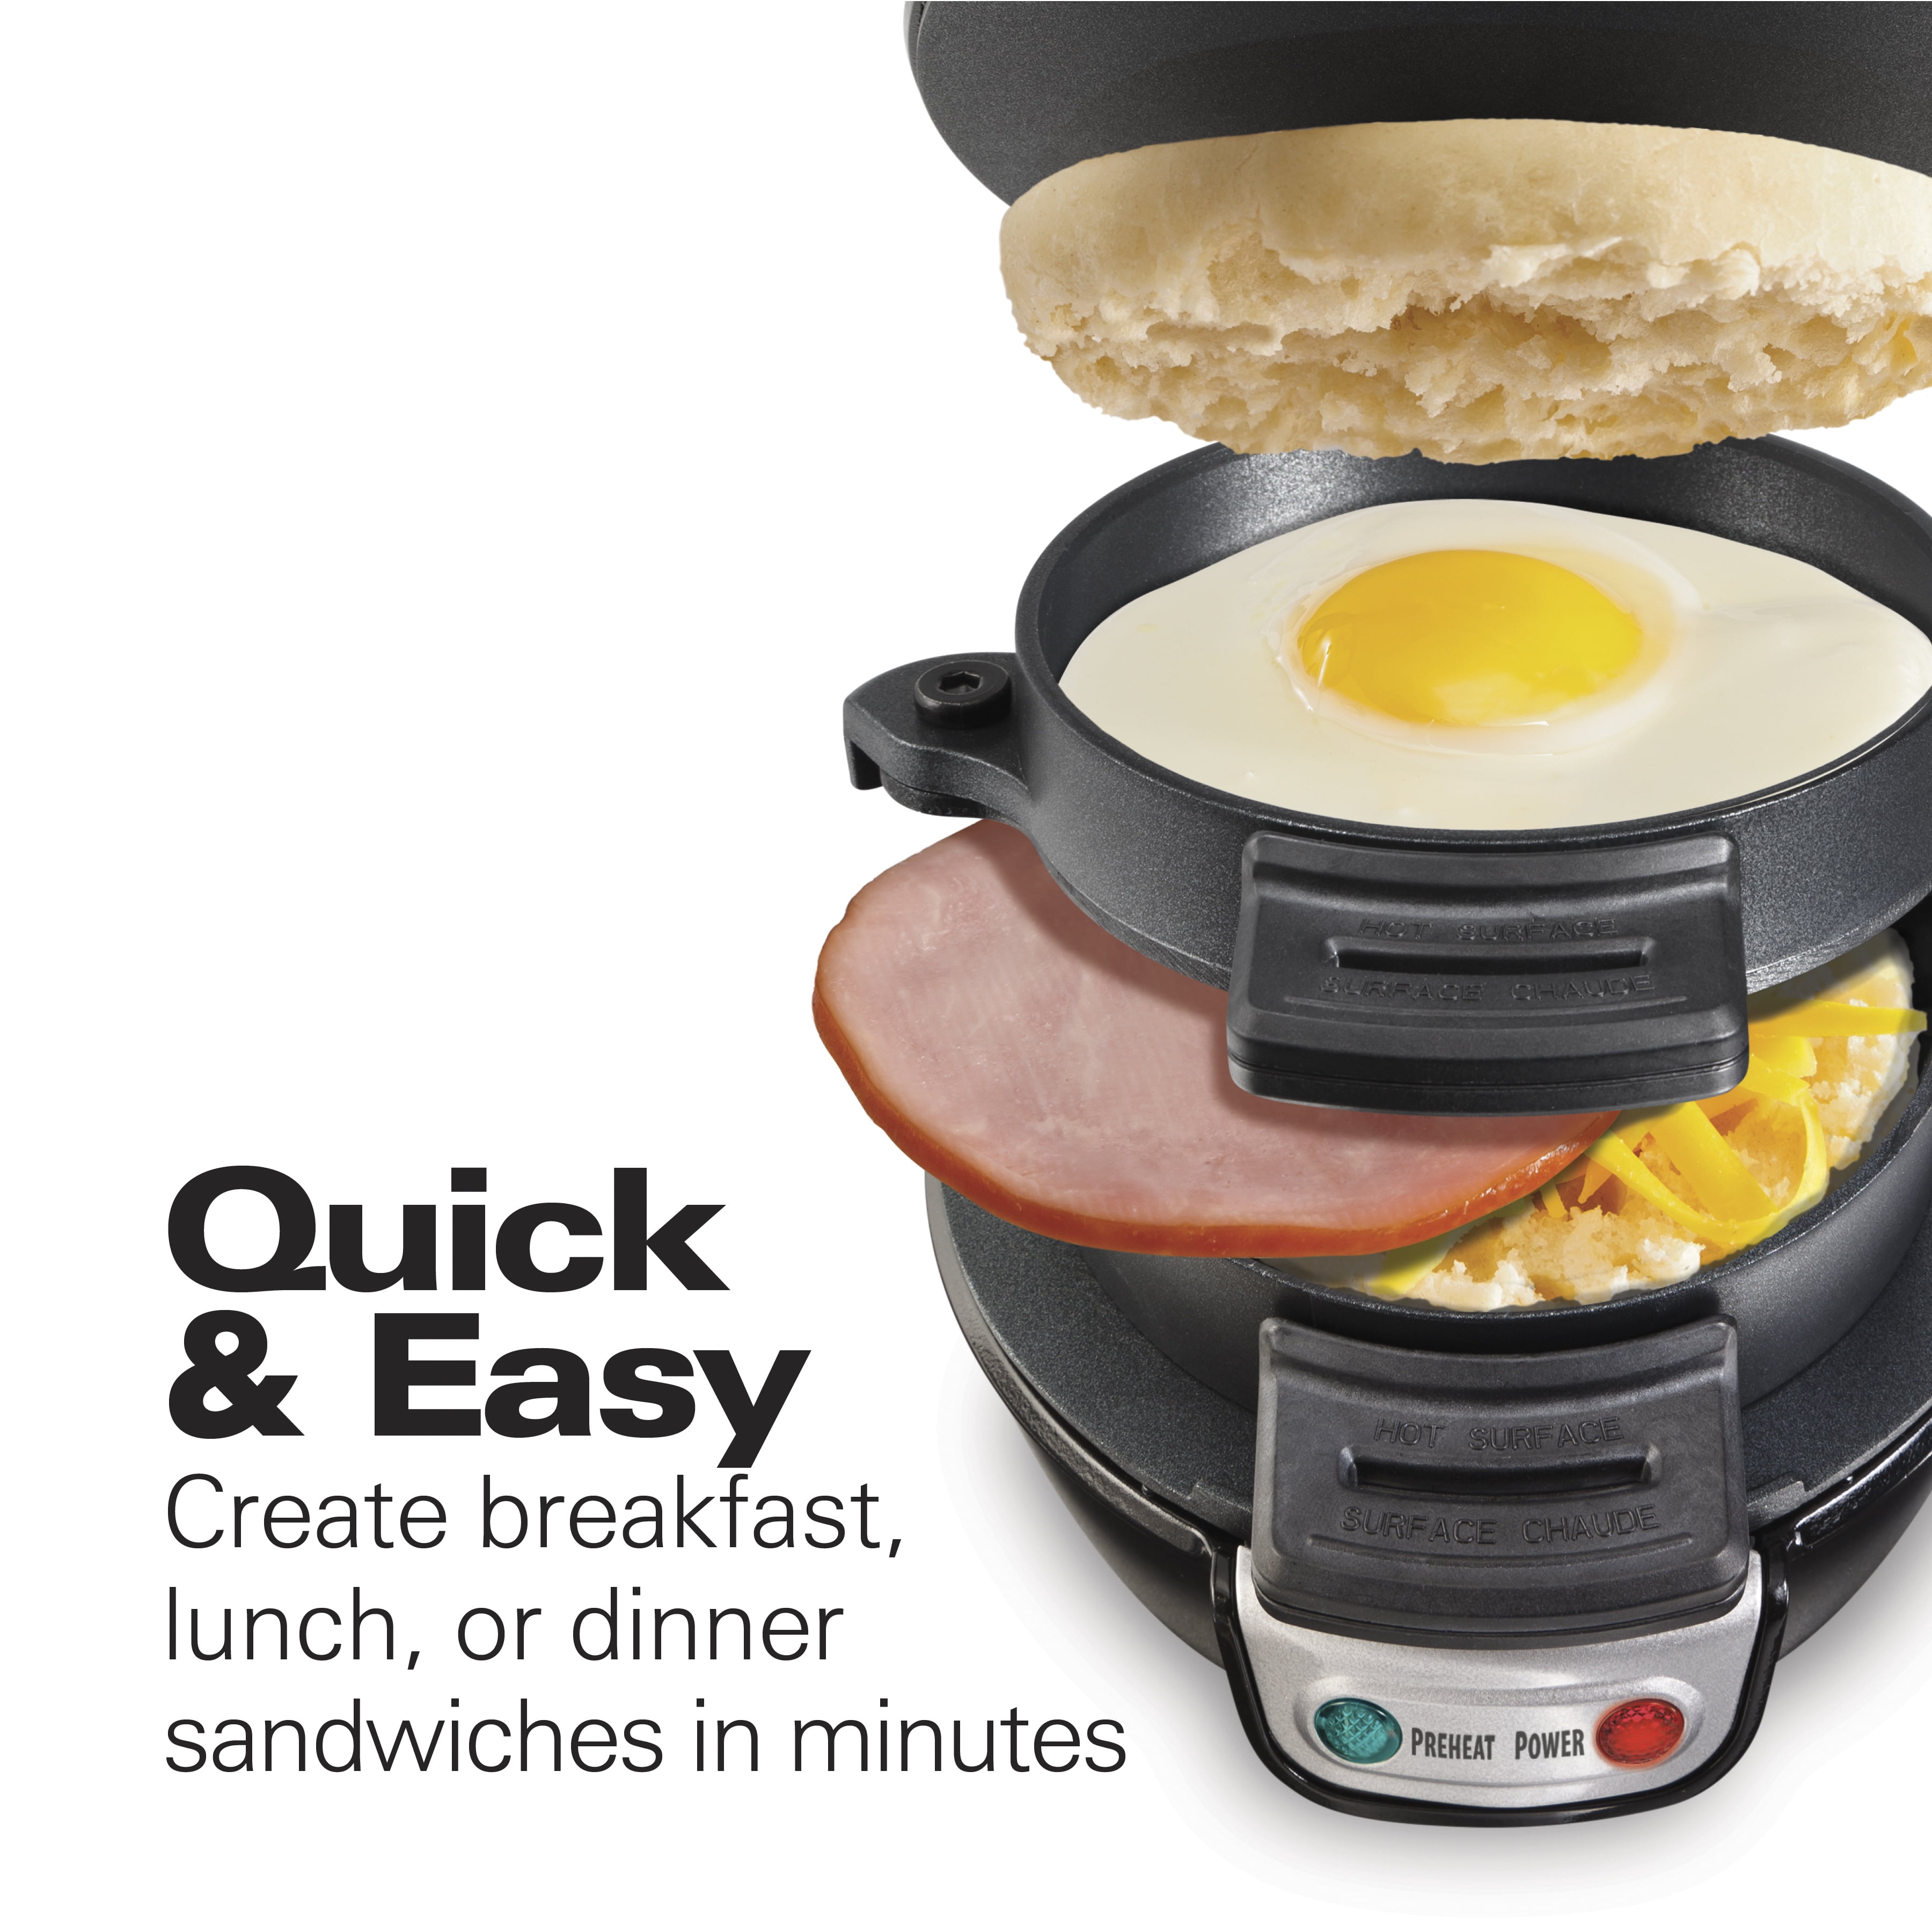 Hamilton Beach Breakfast Sandwich Maker with Egg Cooker Ring, Customize  Ingredients, Perfect for English Muffins, Croissants, Mini Waffles, Black  for Sale in Pembroke Pines, FL - OfferUp